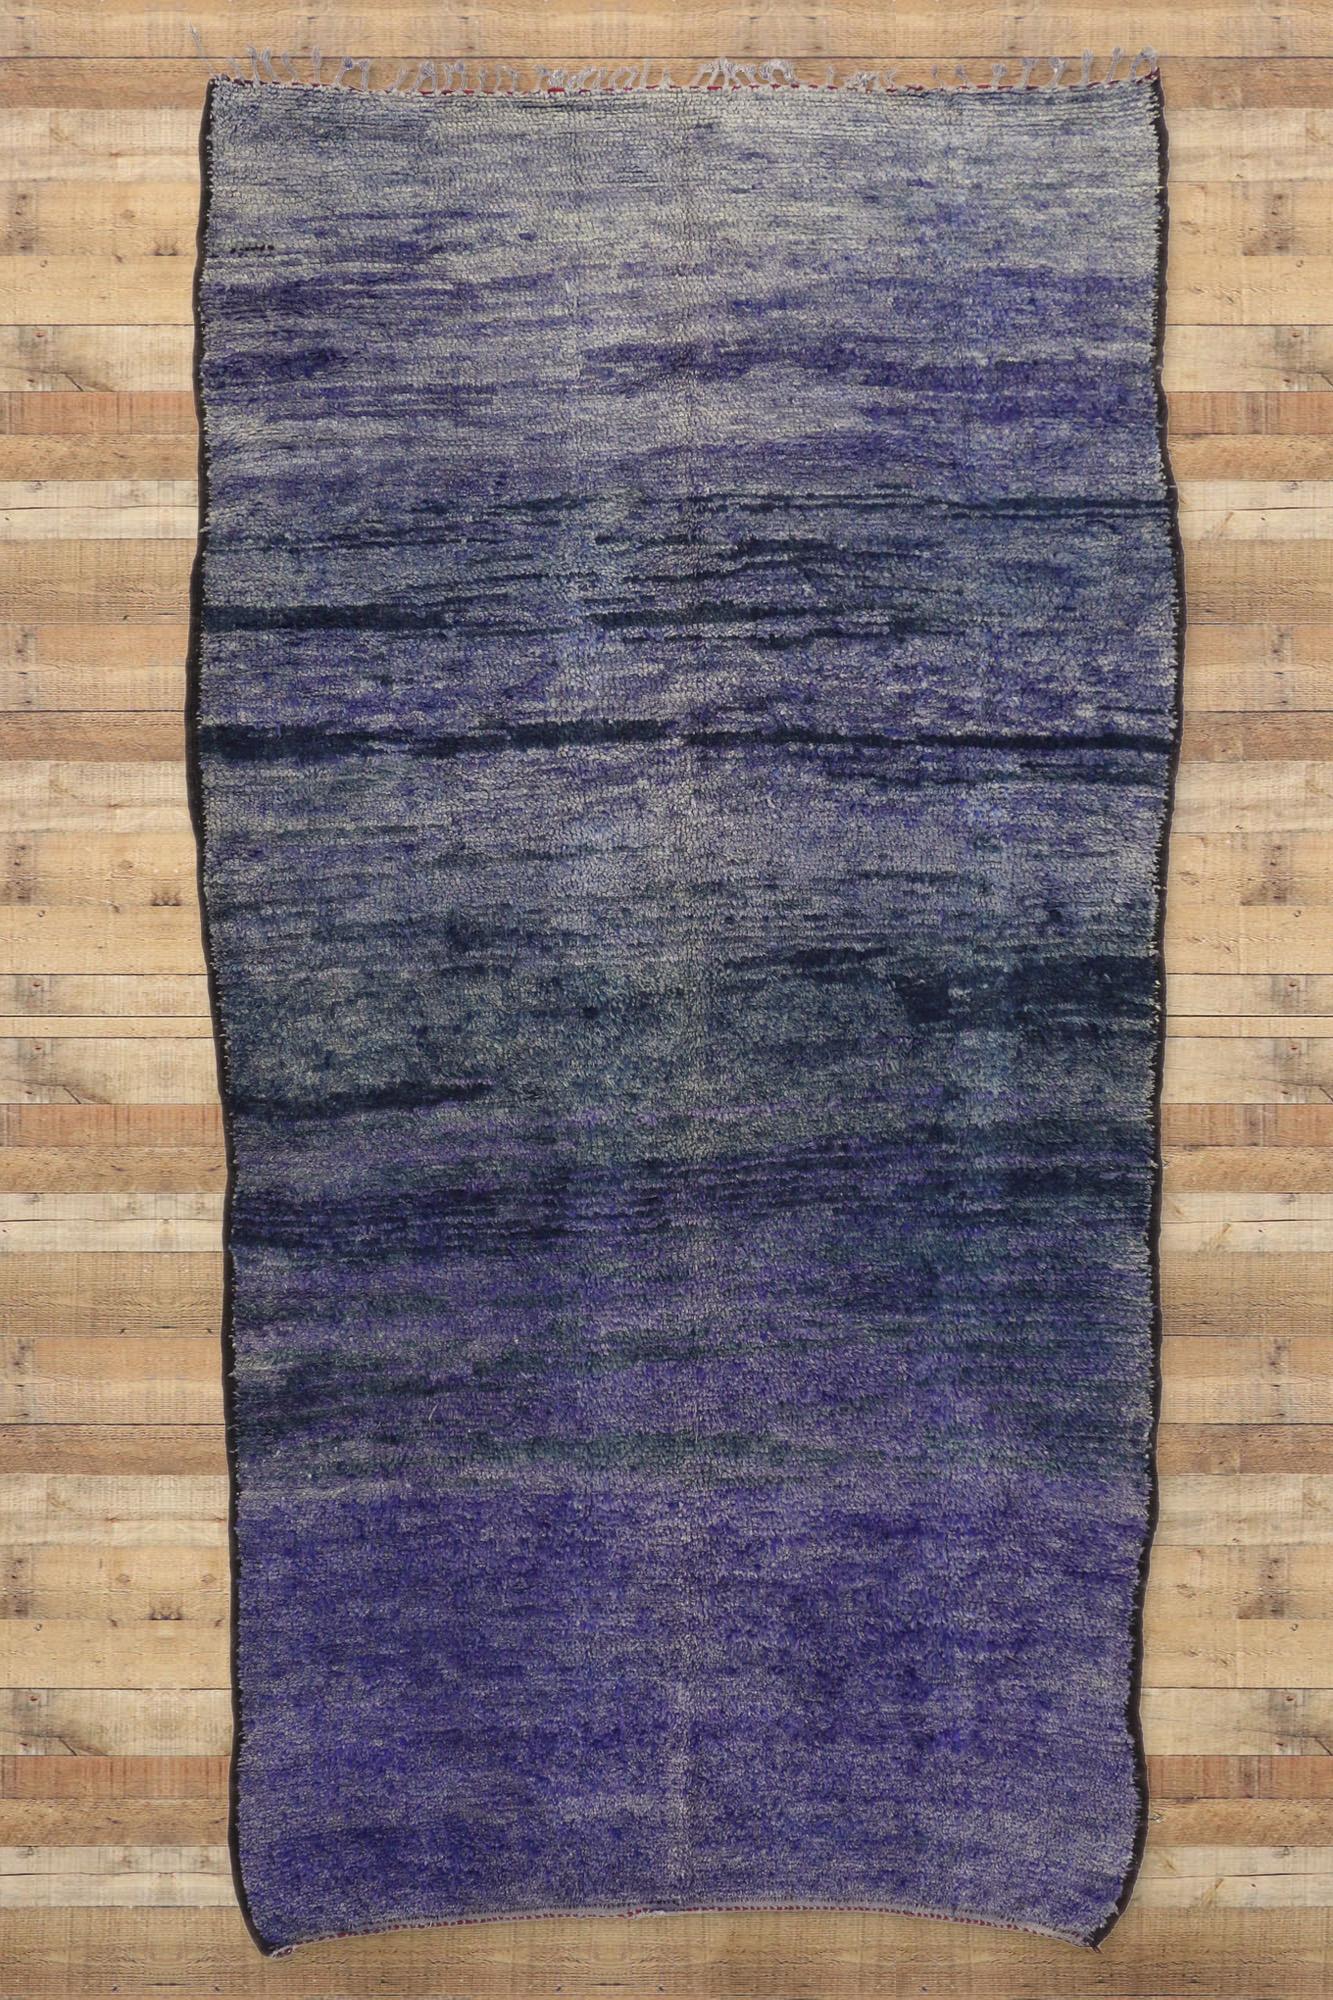 Vintage Purple Beni Mrirt Moroccan Rug Inspired by Mark Rothko Chapel In Good Condition For Sale In Dallas, TX